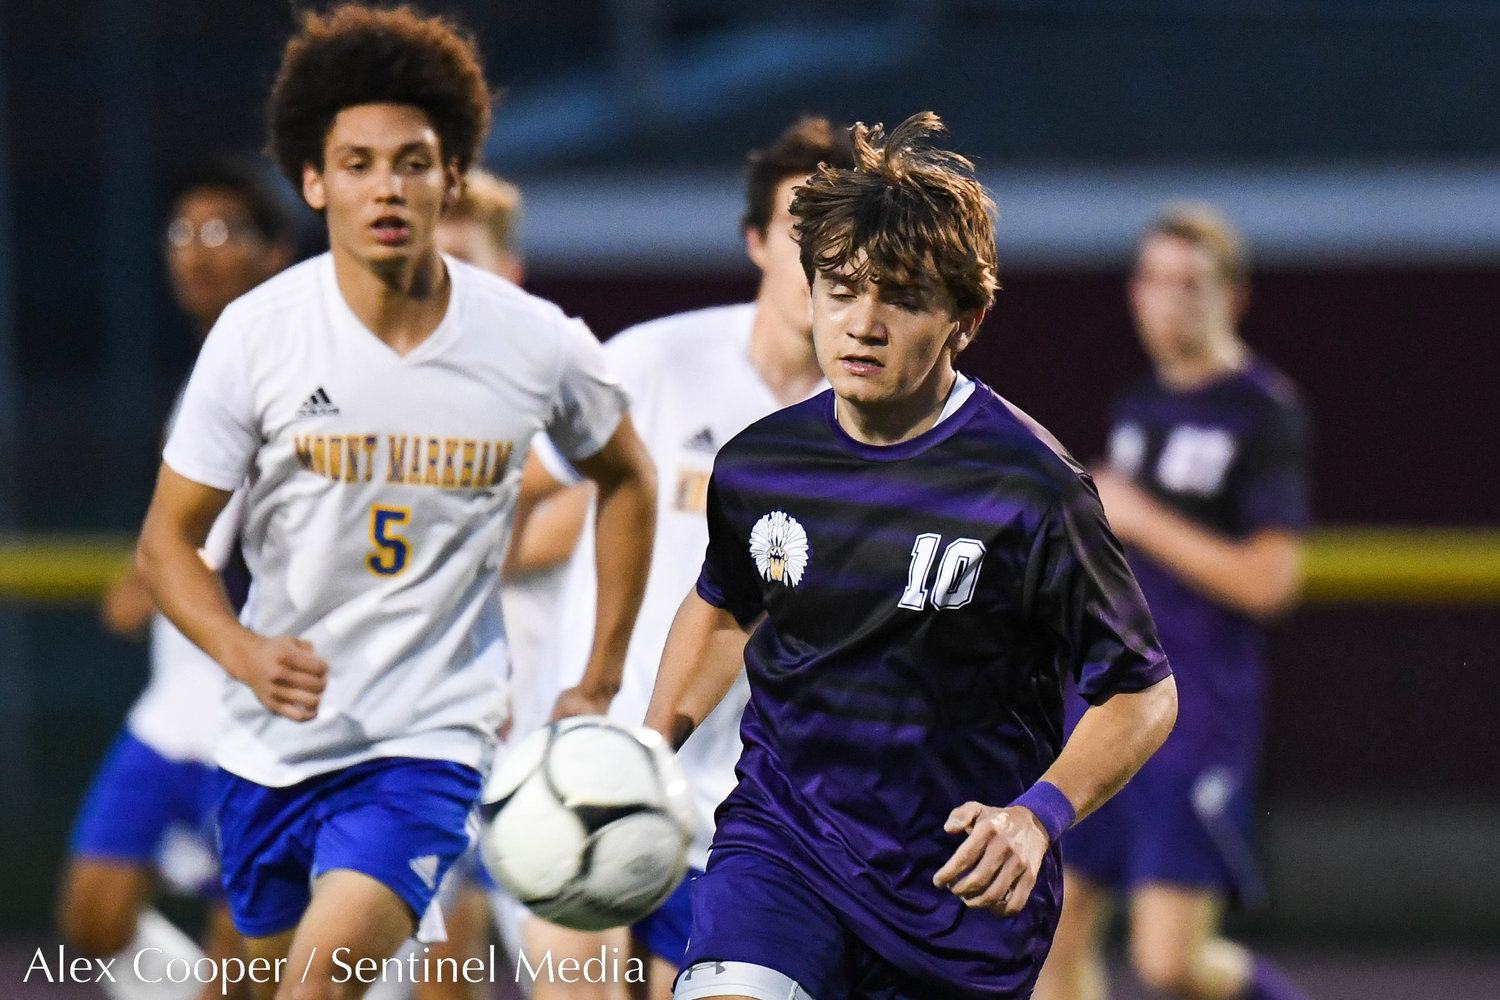 Waterville player Connor Stanton (10) attempts to settle the ball during the Class C boys soccer semifinals game against Mt. Markham on Wednesday, Oct. 26 at Canastota.